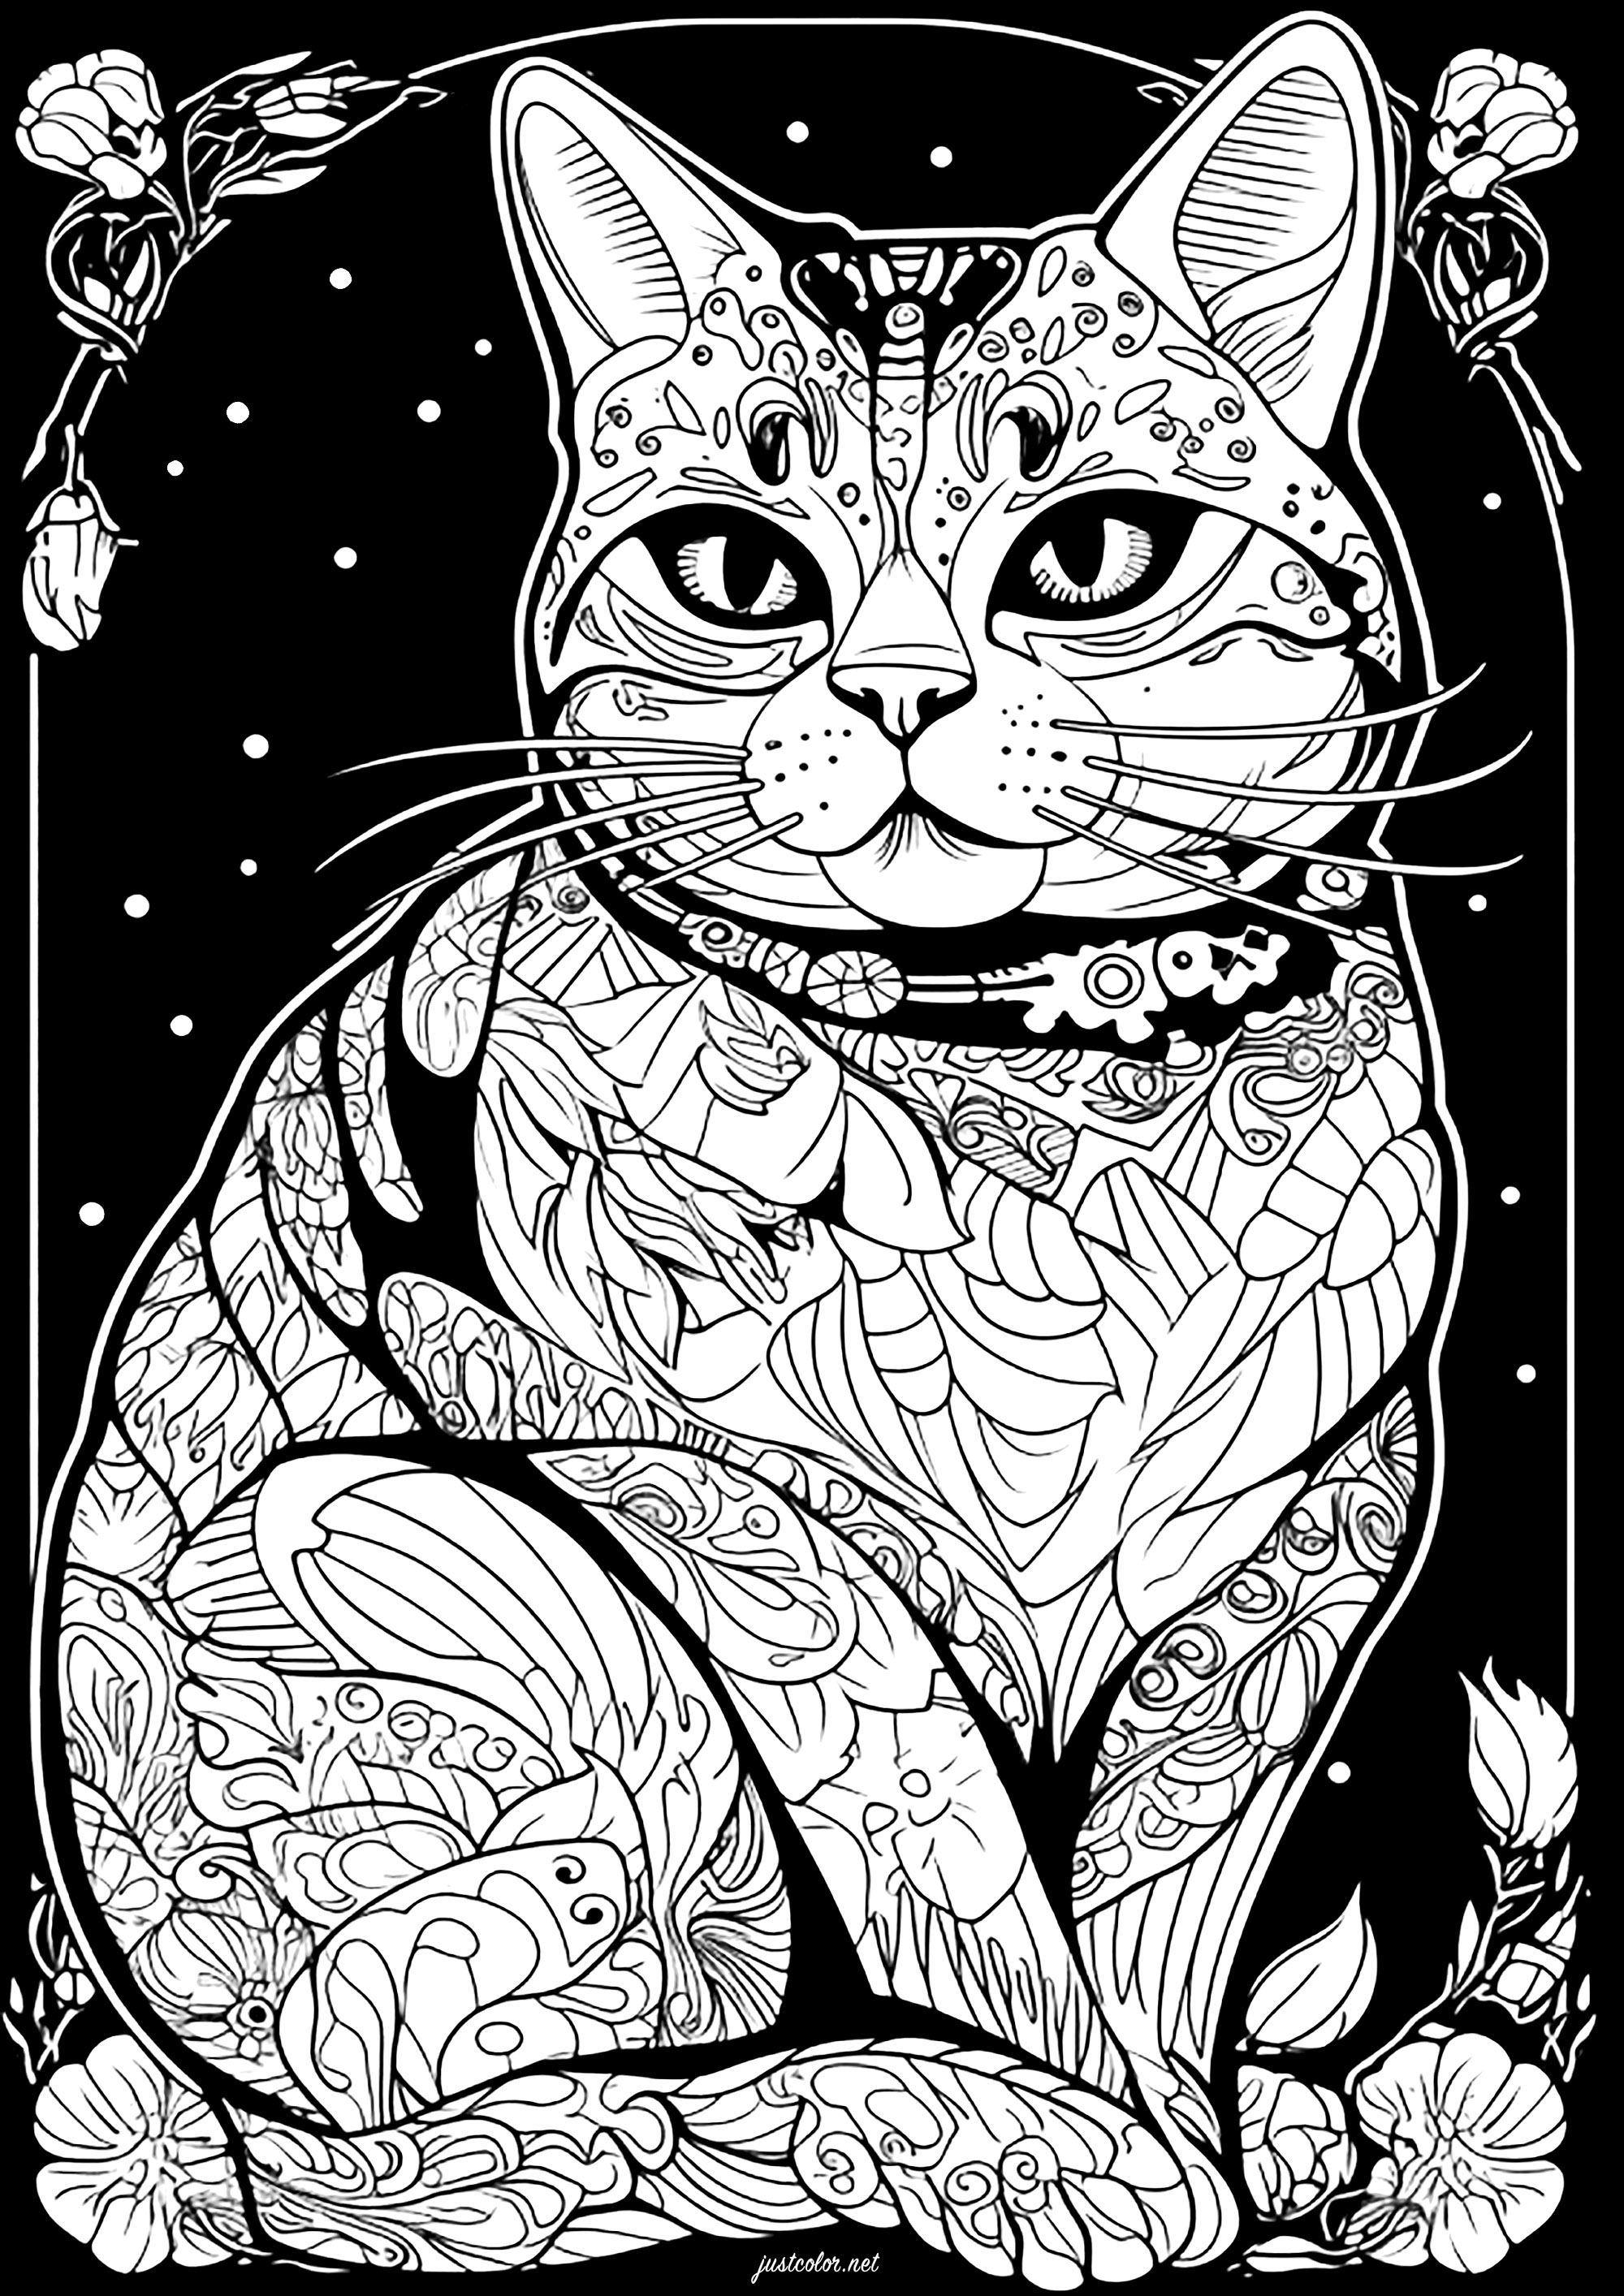 Superb cat coloring on black background. Many patterns to color